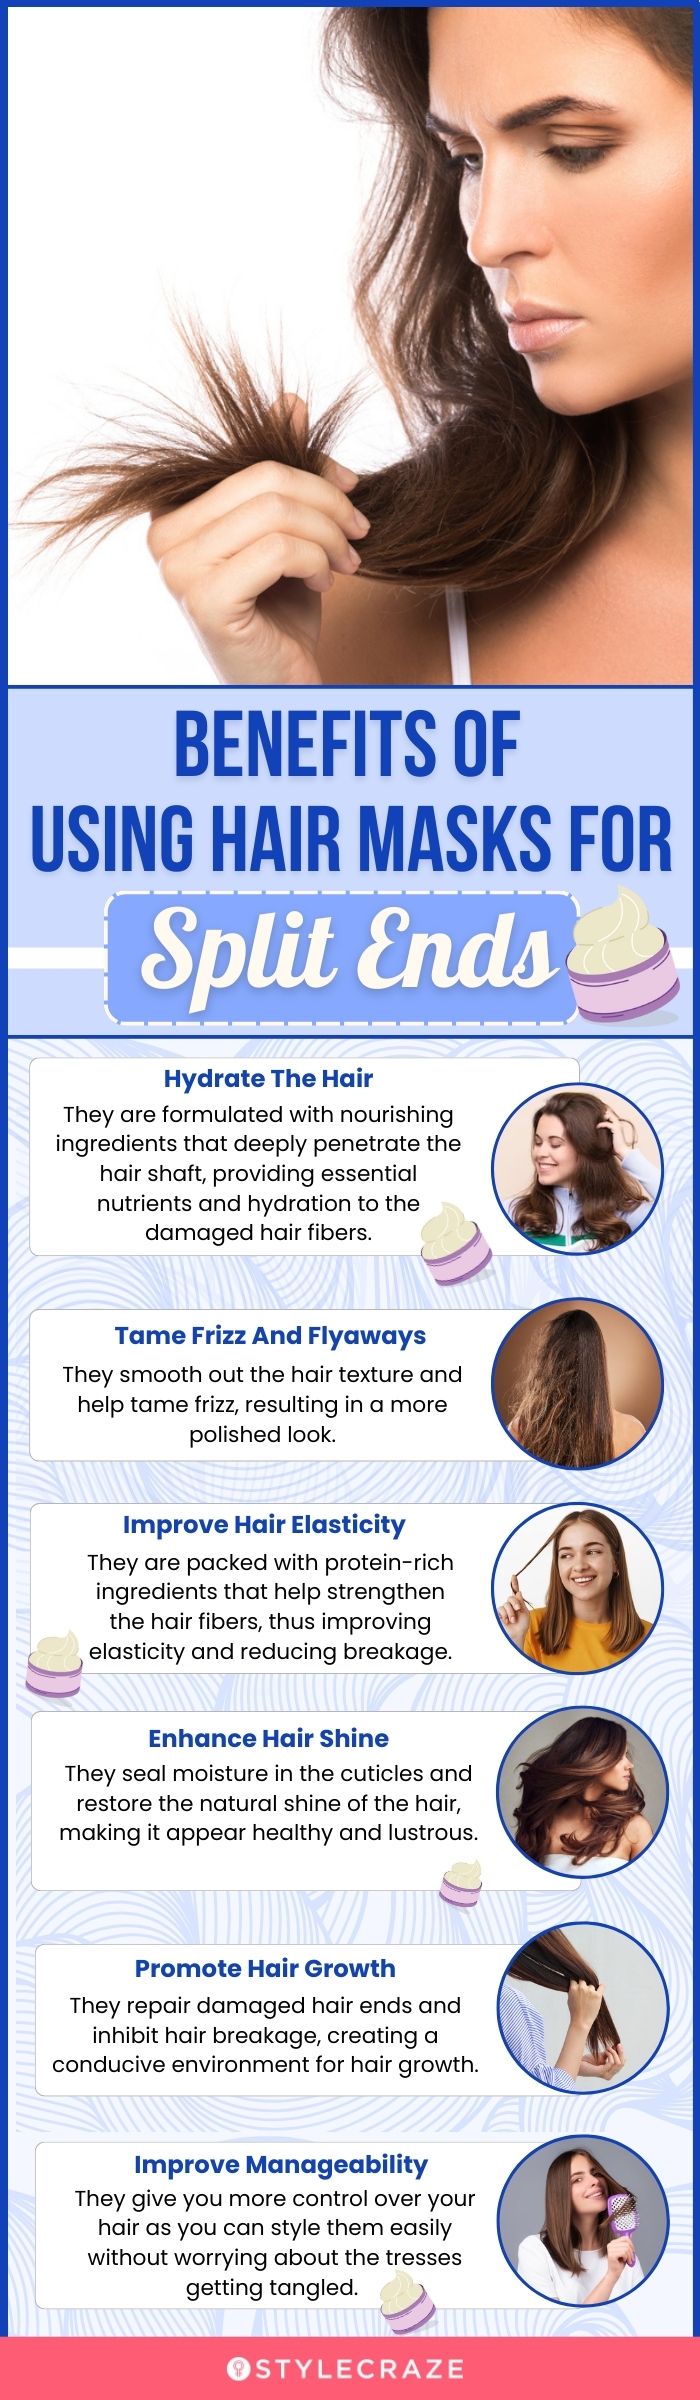 Benefits Of Using Hair Masks For Split Ends(infographic)